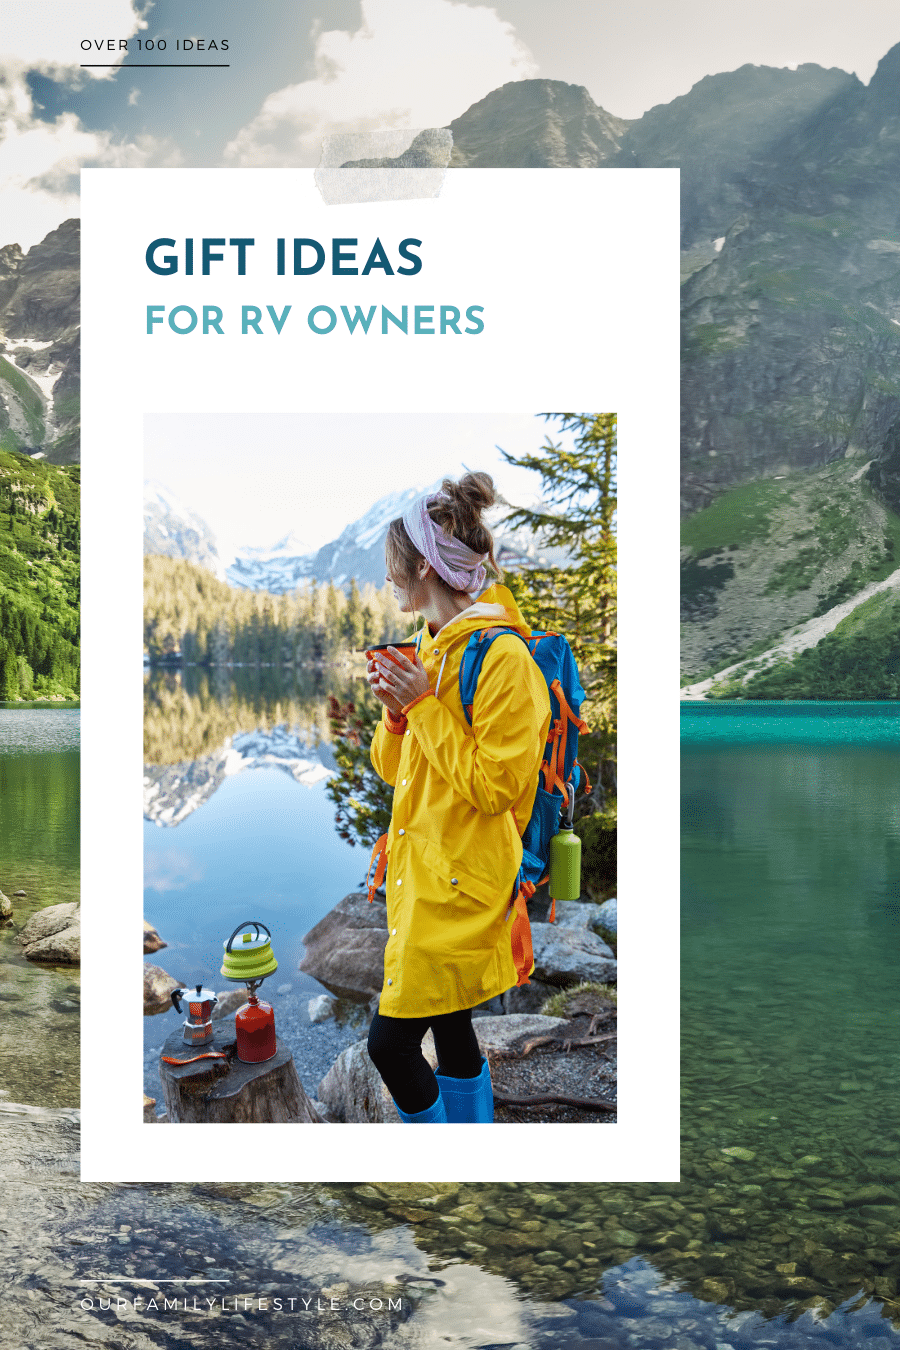 100+ Gift Ideas for RV Owners